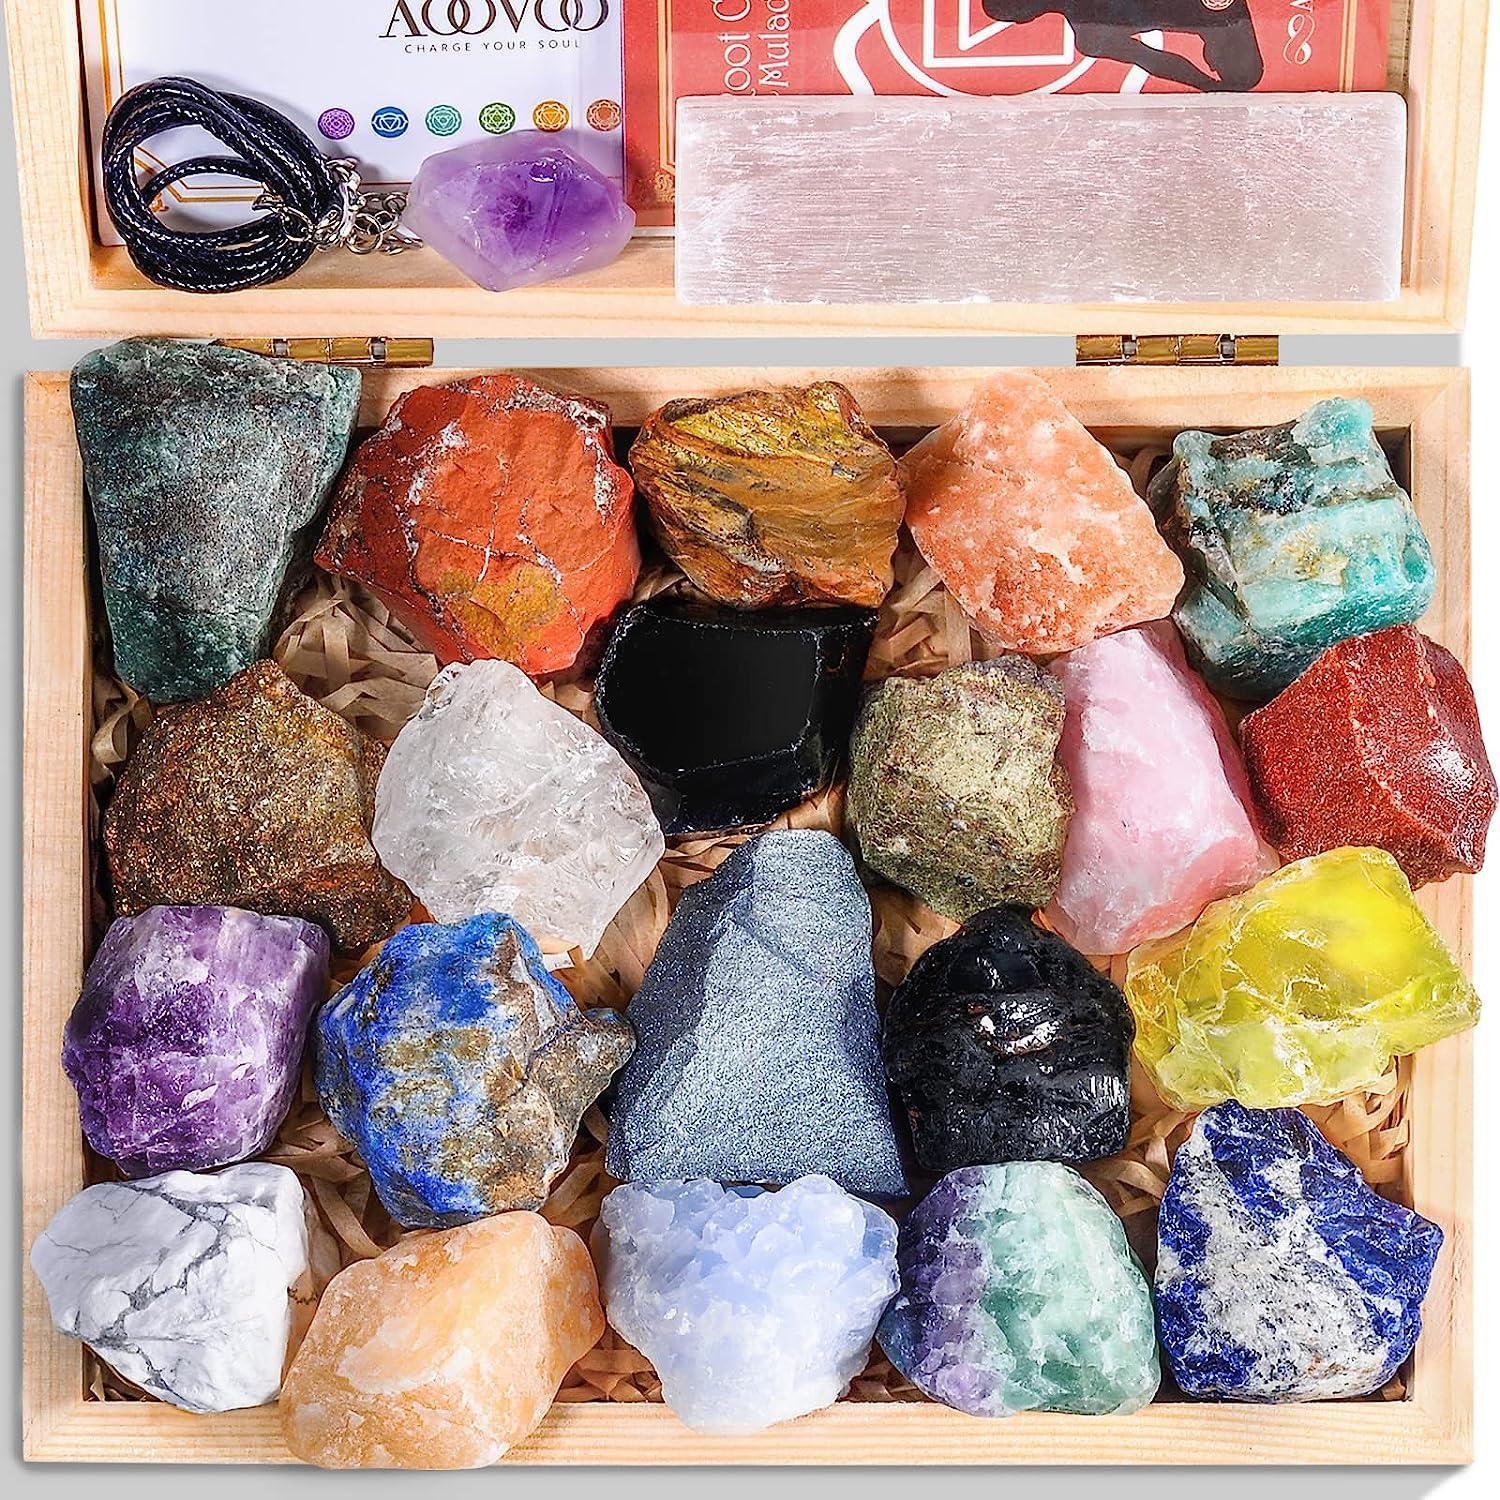 AOOVOO 31Pcs Crystals and Healing Stone Collection